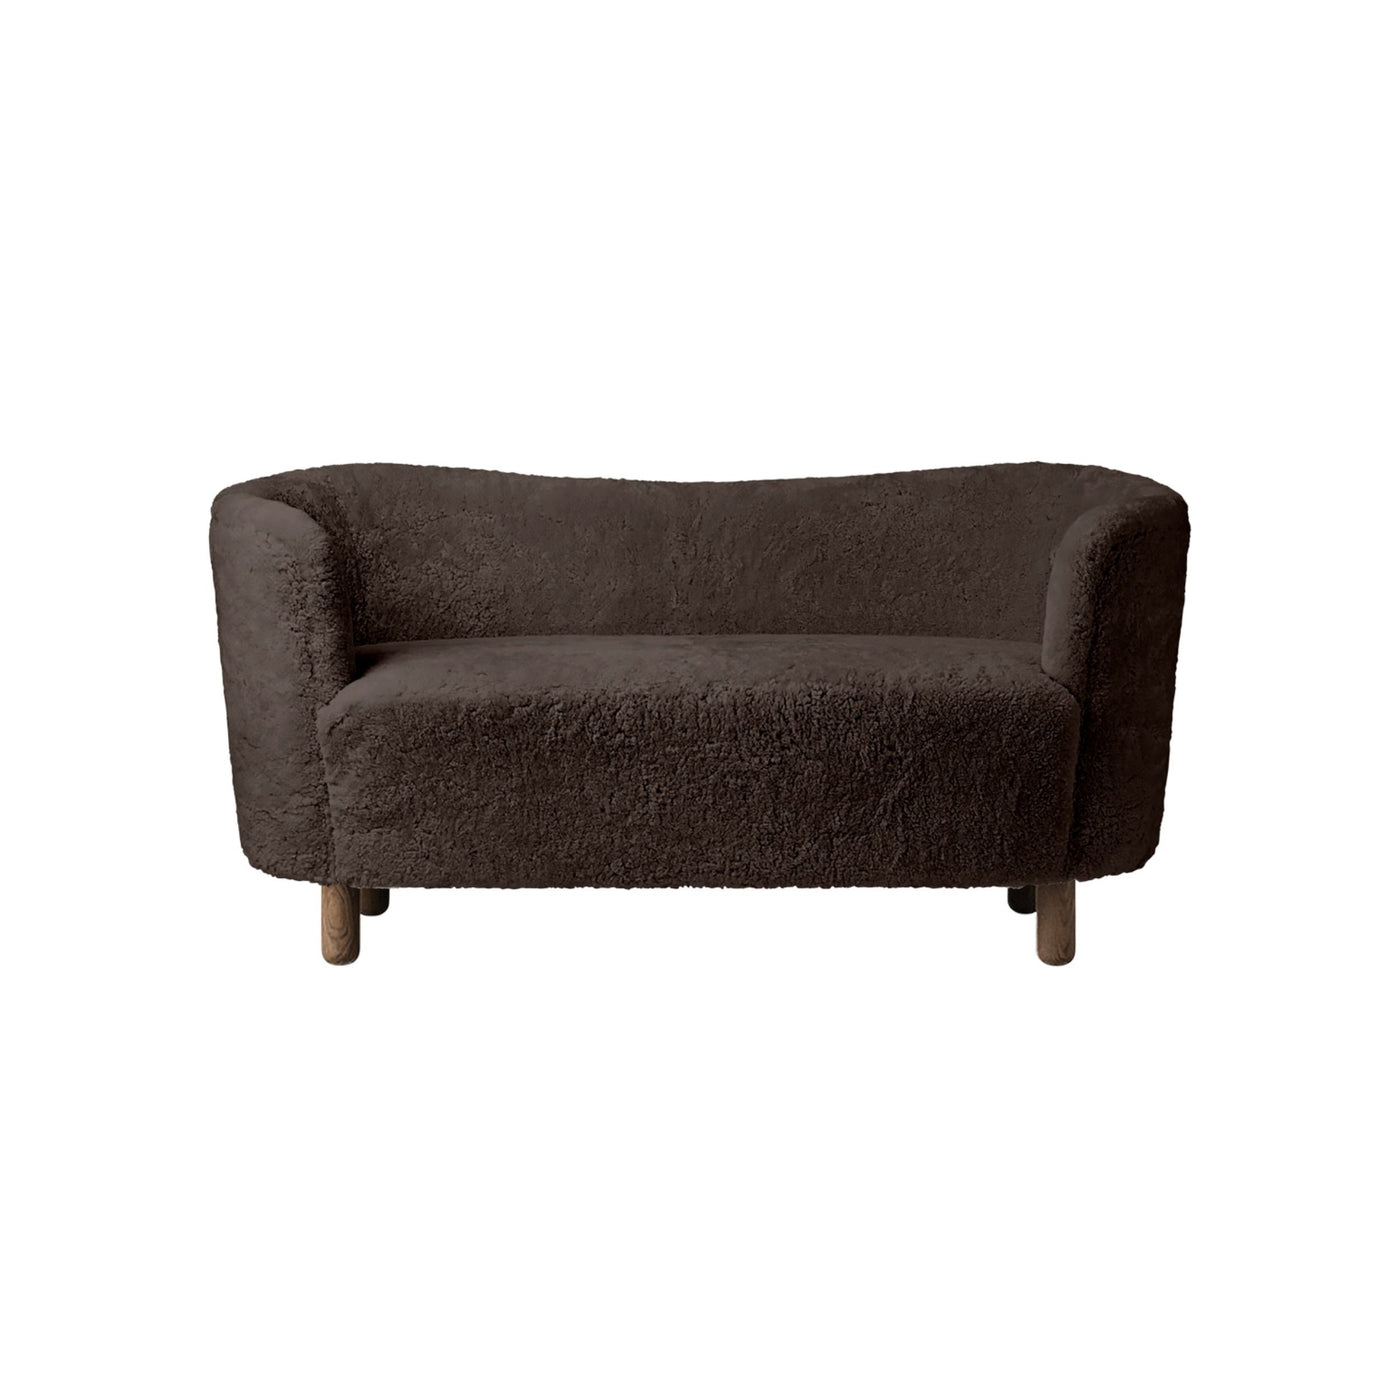 By Lassen Mingle sofa with smoked oak legs. Made to order from someday designs. #colour_sheepskin-espresso